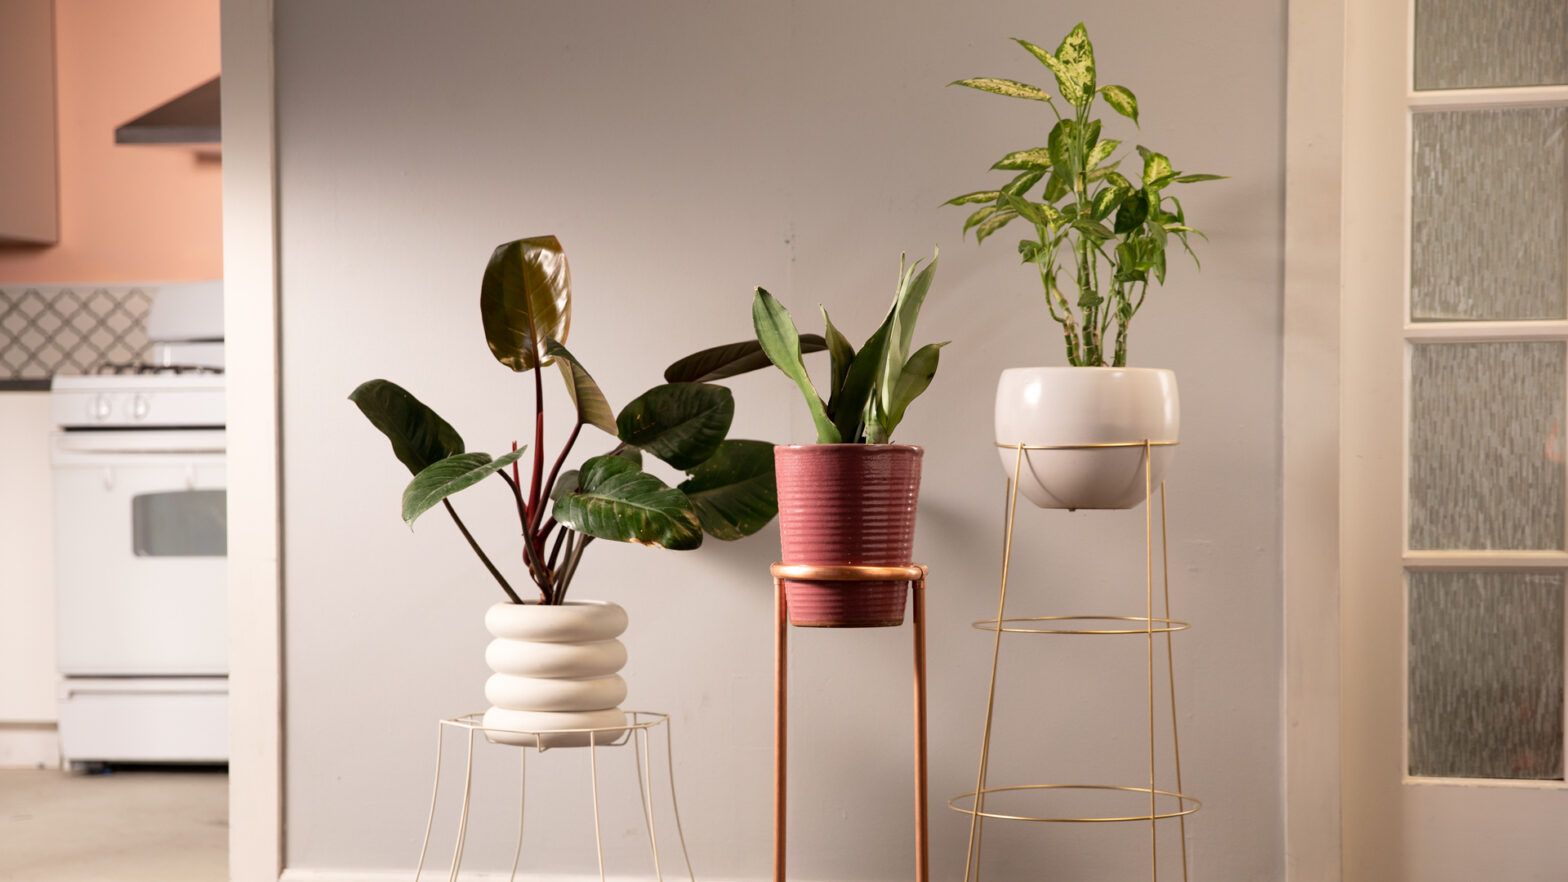 Diy Modern Plant Stands 3 Ways In 15 Minutes Or Less | Geico Living Within Modern Plant Stands (View 12 of 15)